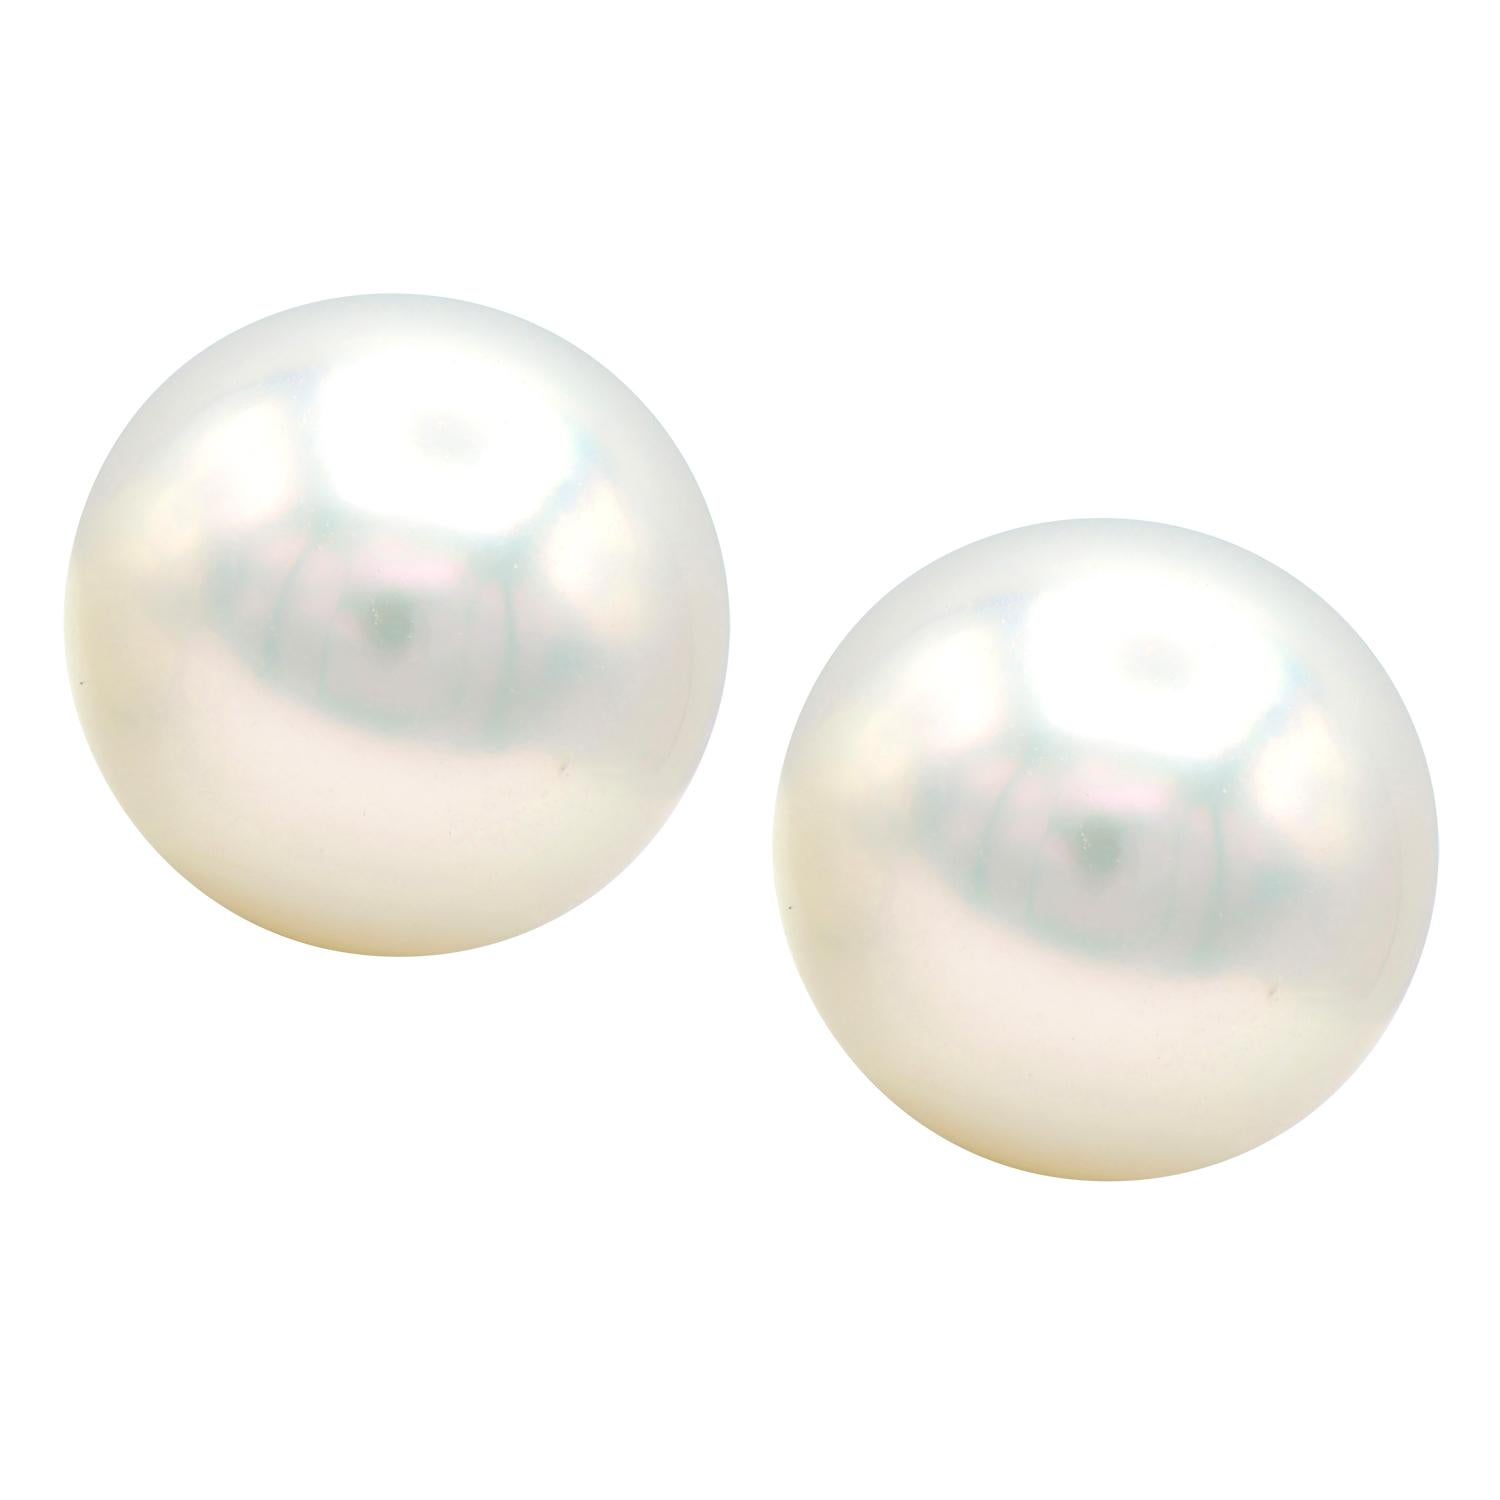 Round Cut South Sea Pearl Stud Earrings with 14 Karat White Gold Posts and Backs For Sale